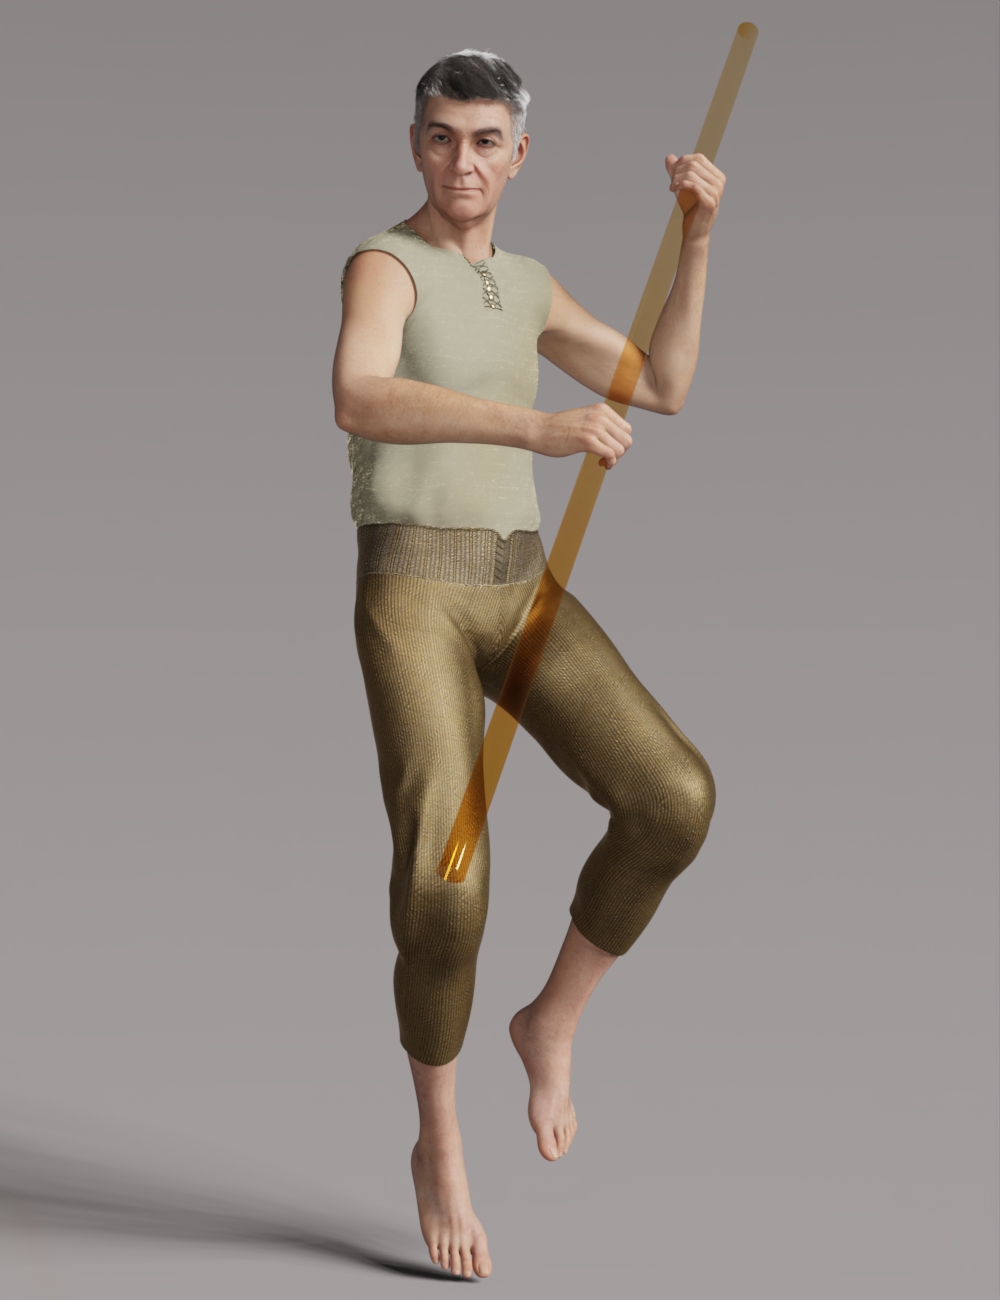 Staff Wielder Poses for Genesis 8 Male and Genesis 8 Female by: Quixotry, 3D Models by Daz 3D